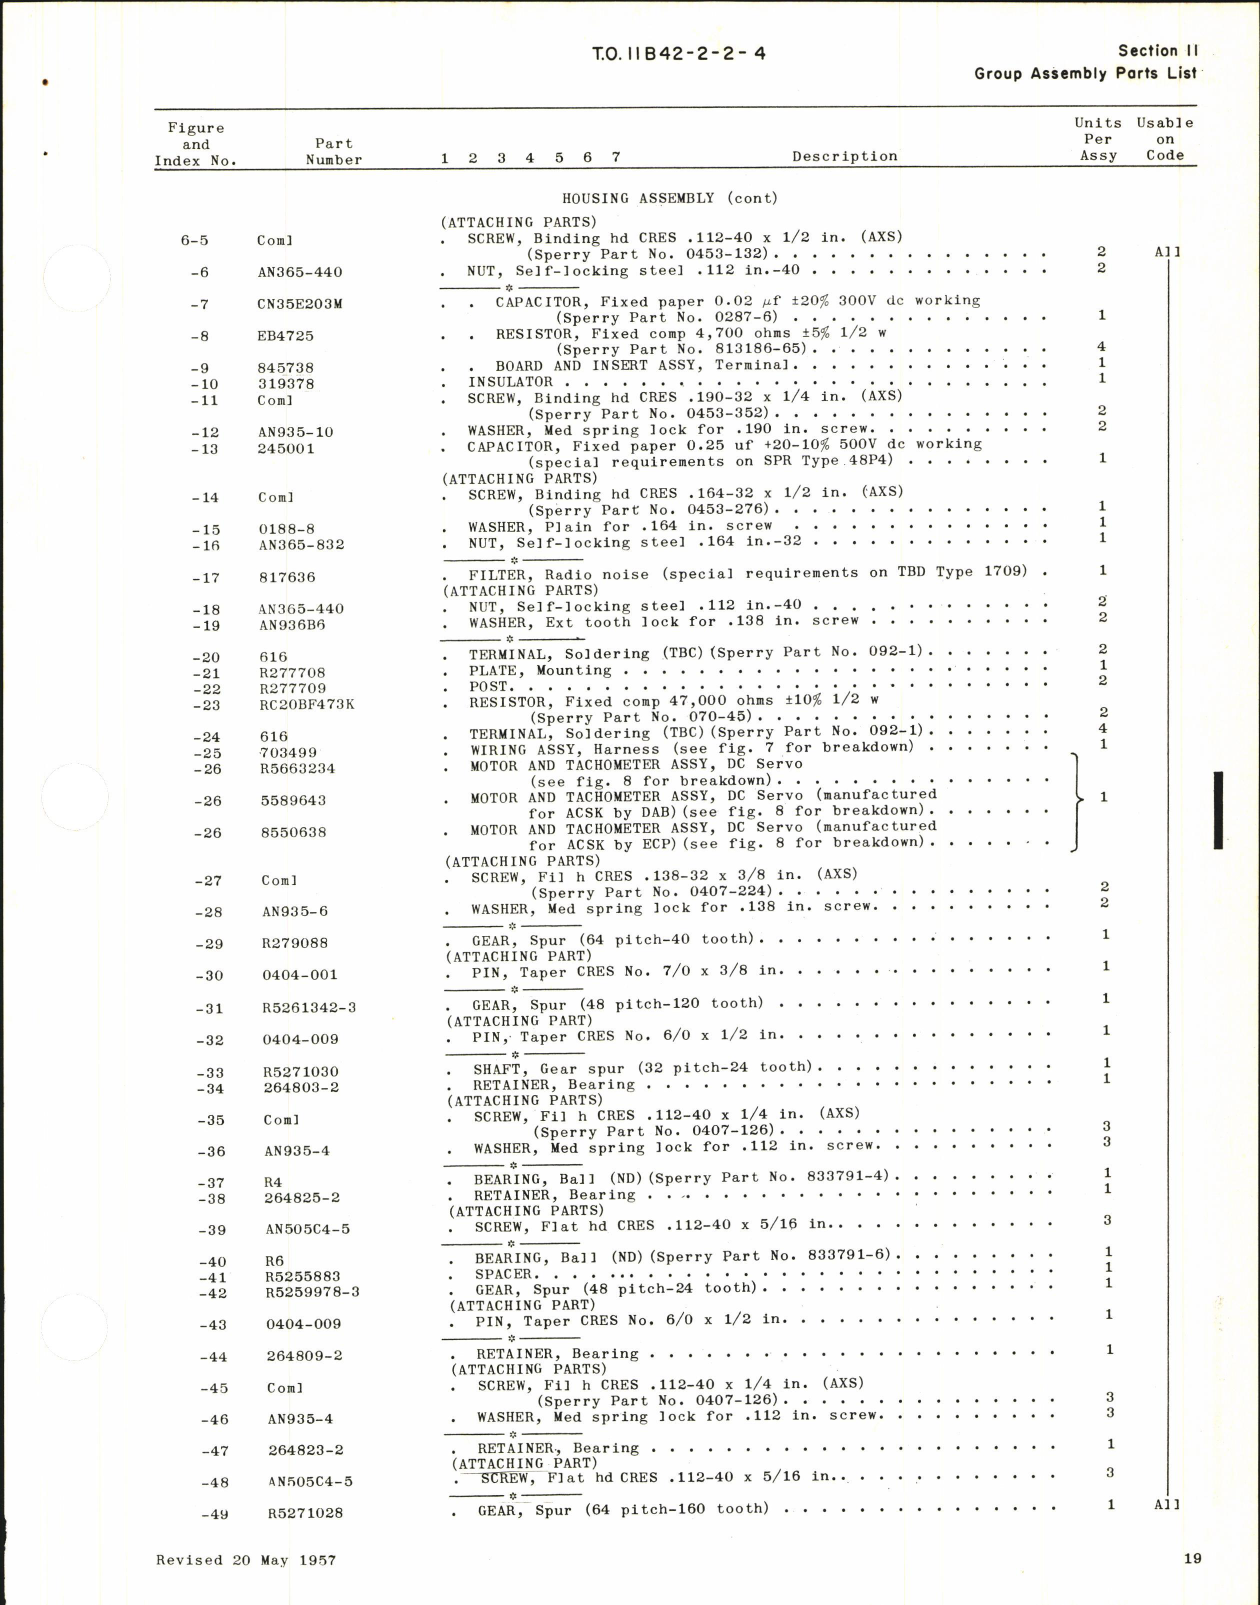 Sample page 7 from AirCorps Library document: Illustrated Parts Breakdown for Periscopic Bombsight Stabilizer Type B-1 Part No. 667126